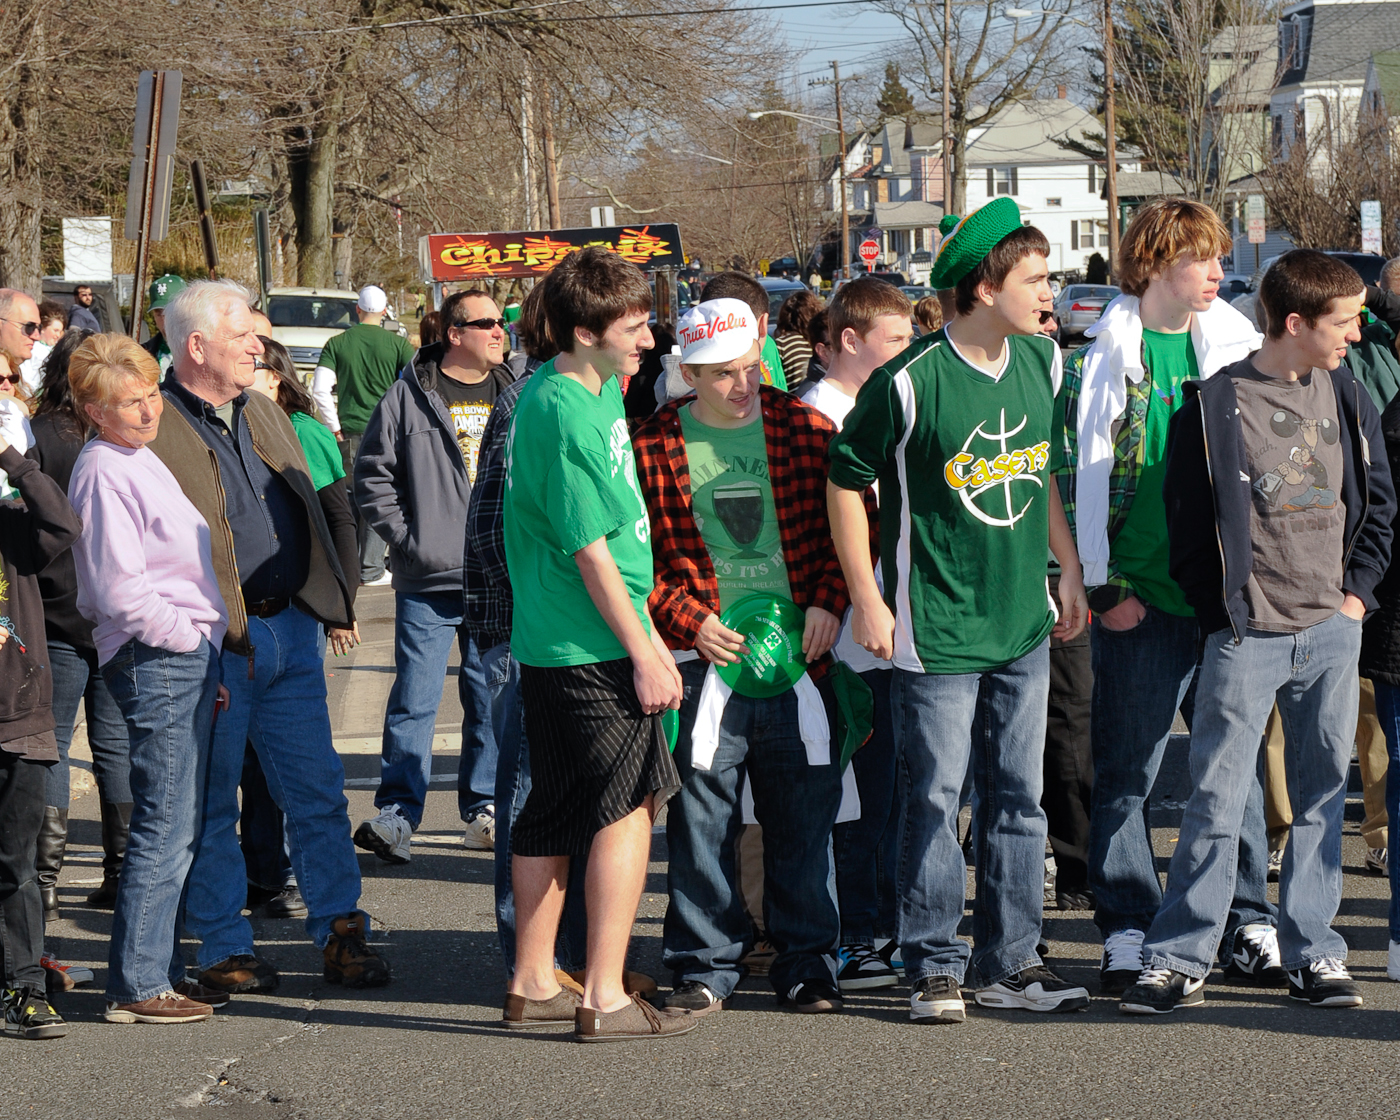 boys in green shirts are standing near some other people